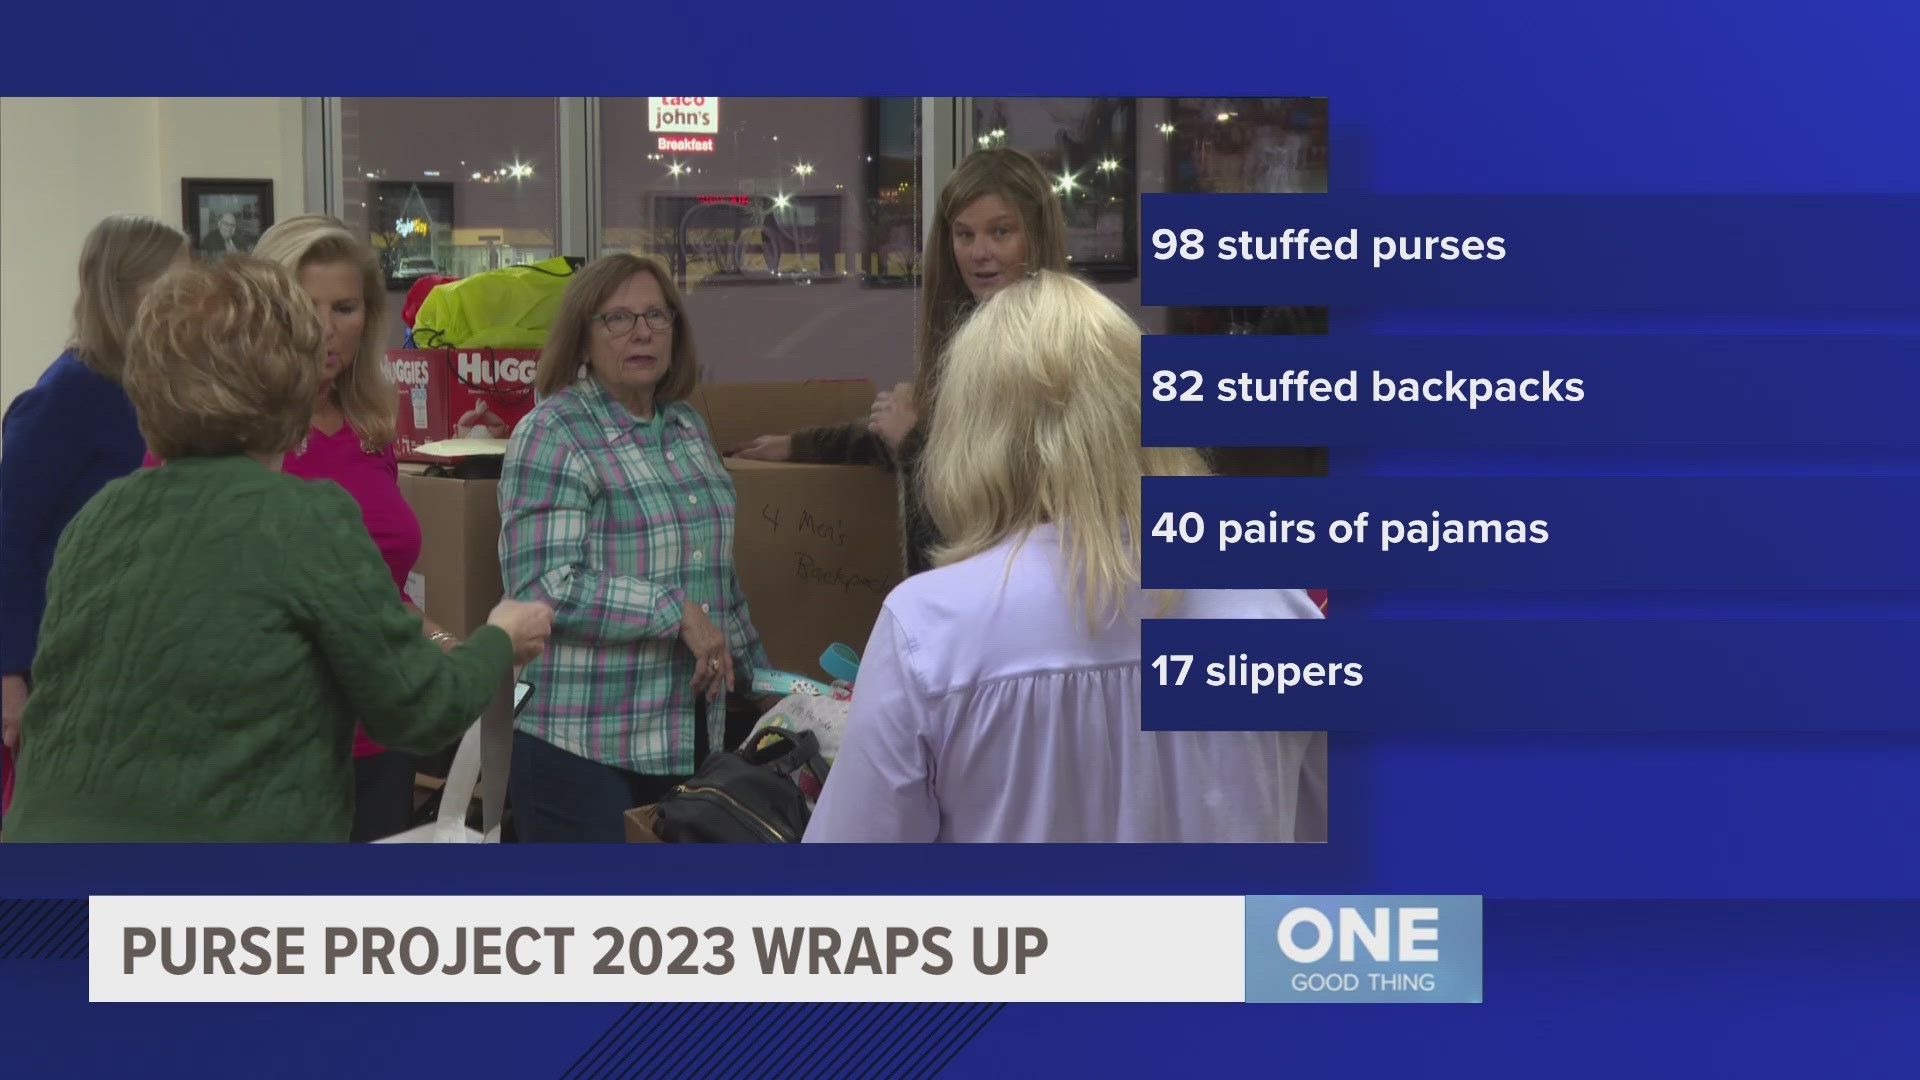 After sharing the emotional story of how her sister died homeless, Denise Kolesar's Purse Project celebrated an incredible season of making a difference.